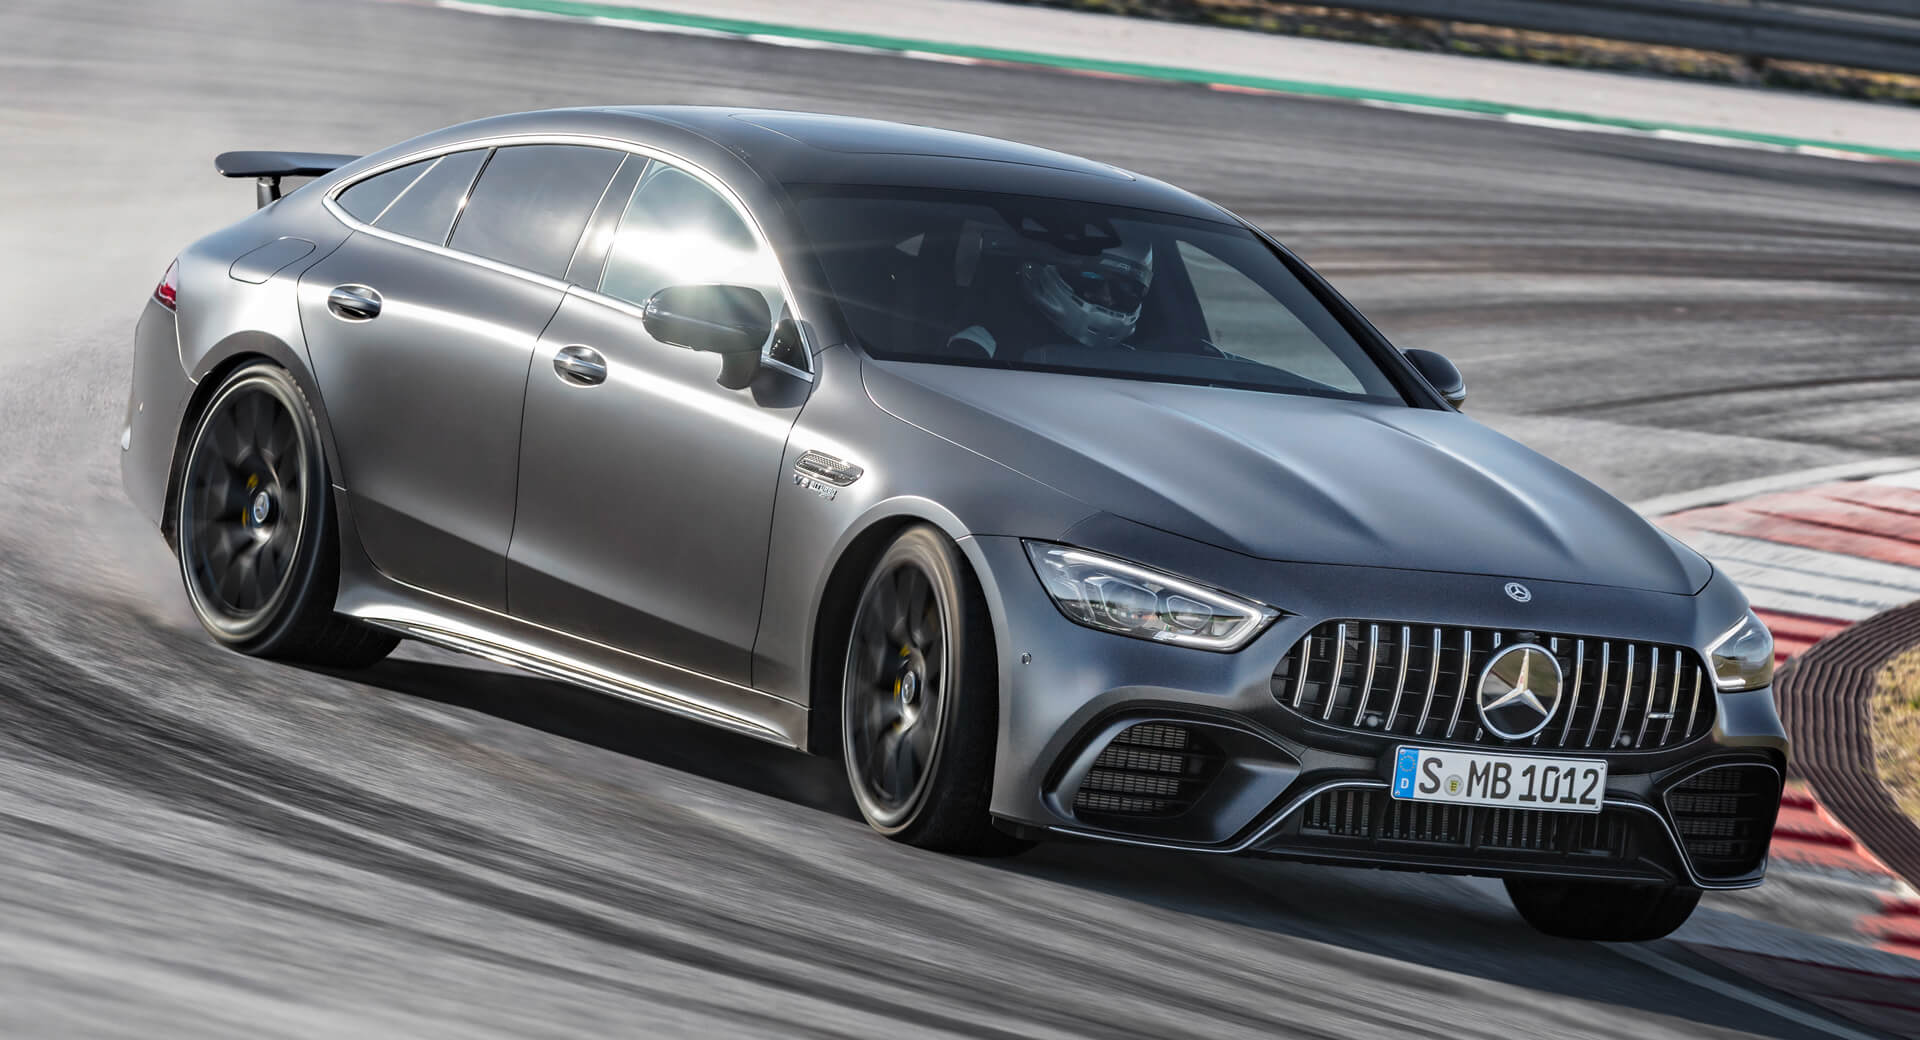 Mercedes Amg Gt 4 Sedan Starts From 150 119 In Germany Carscoops